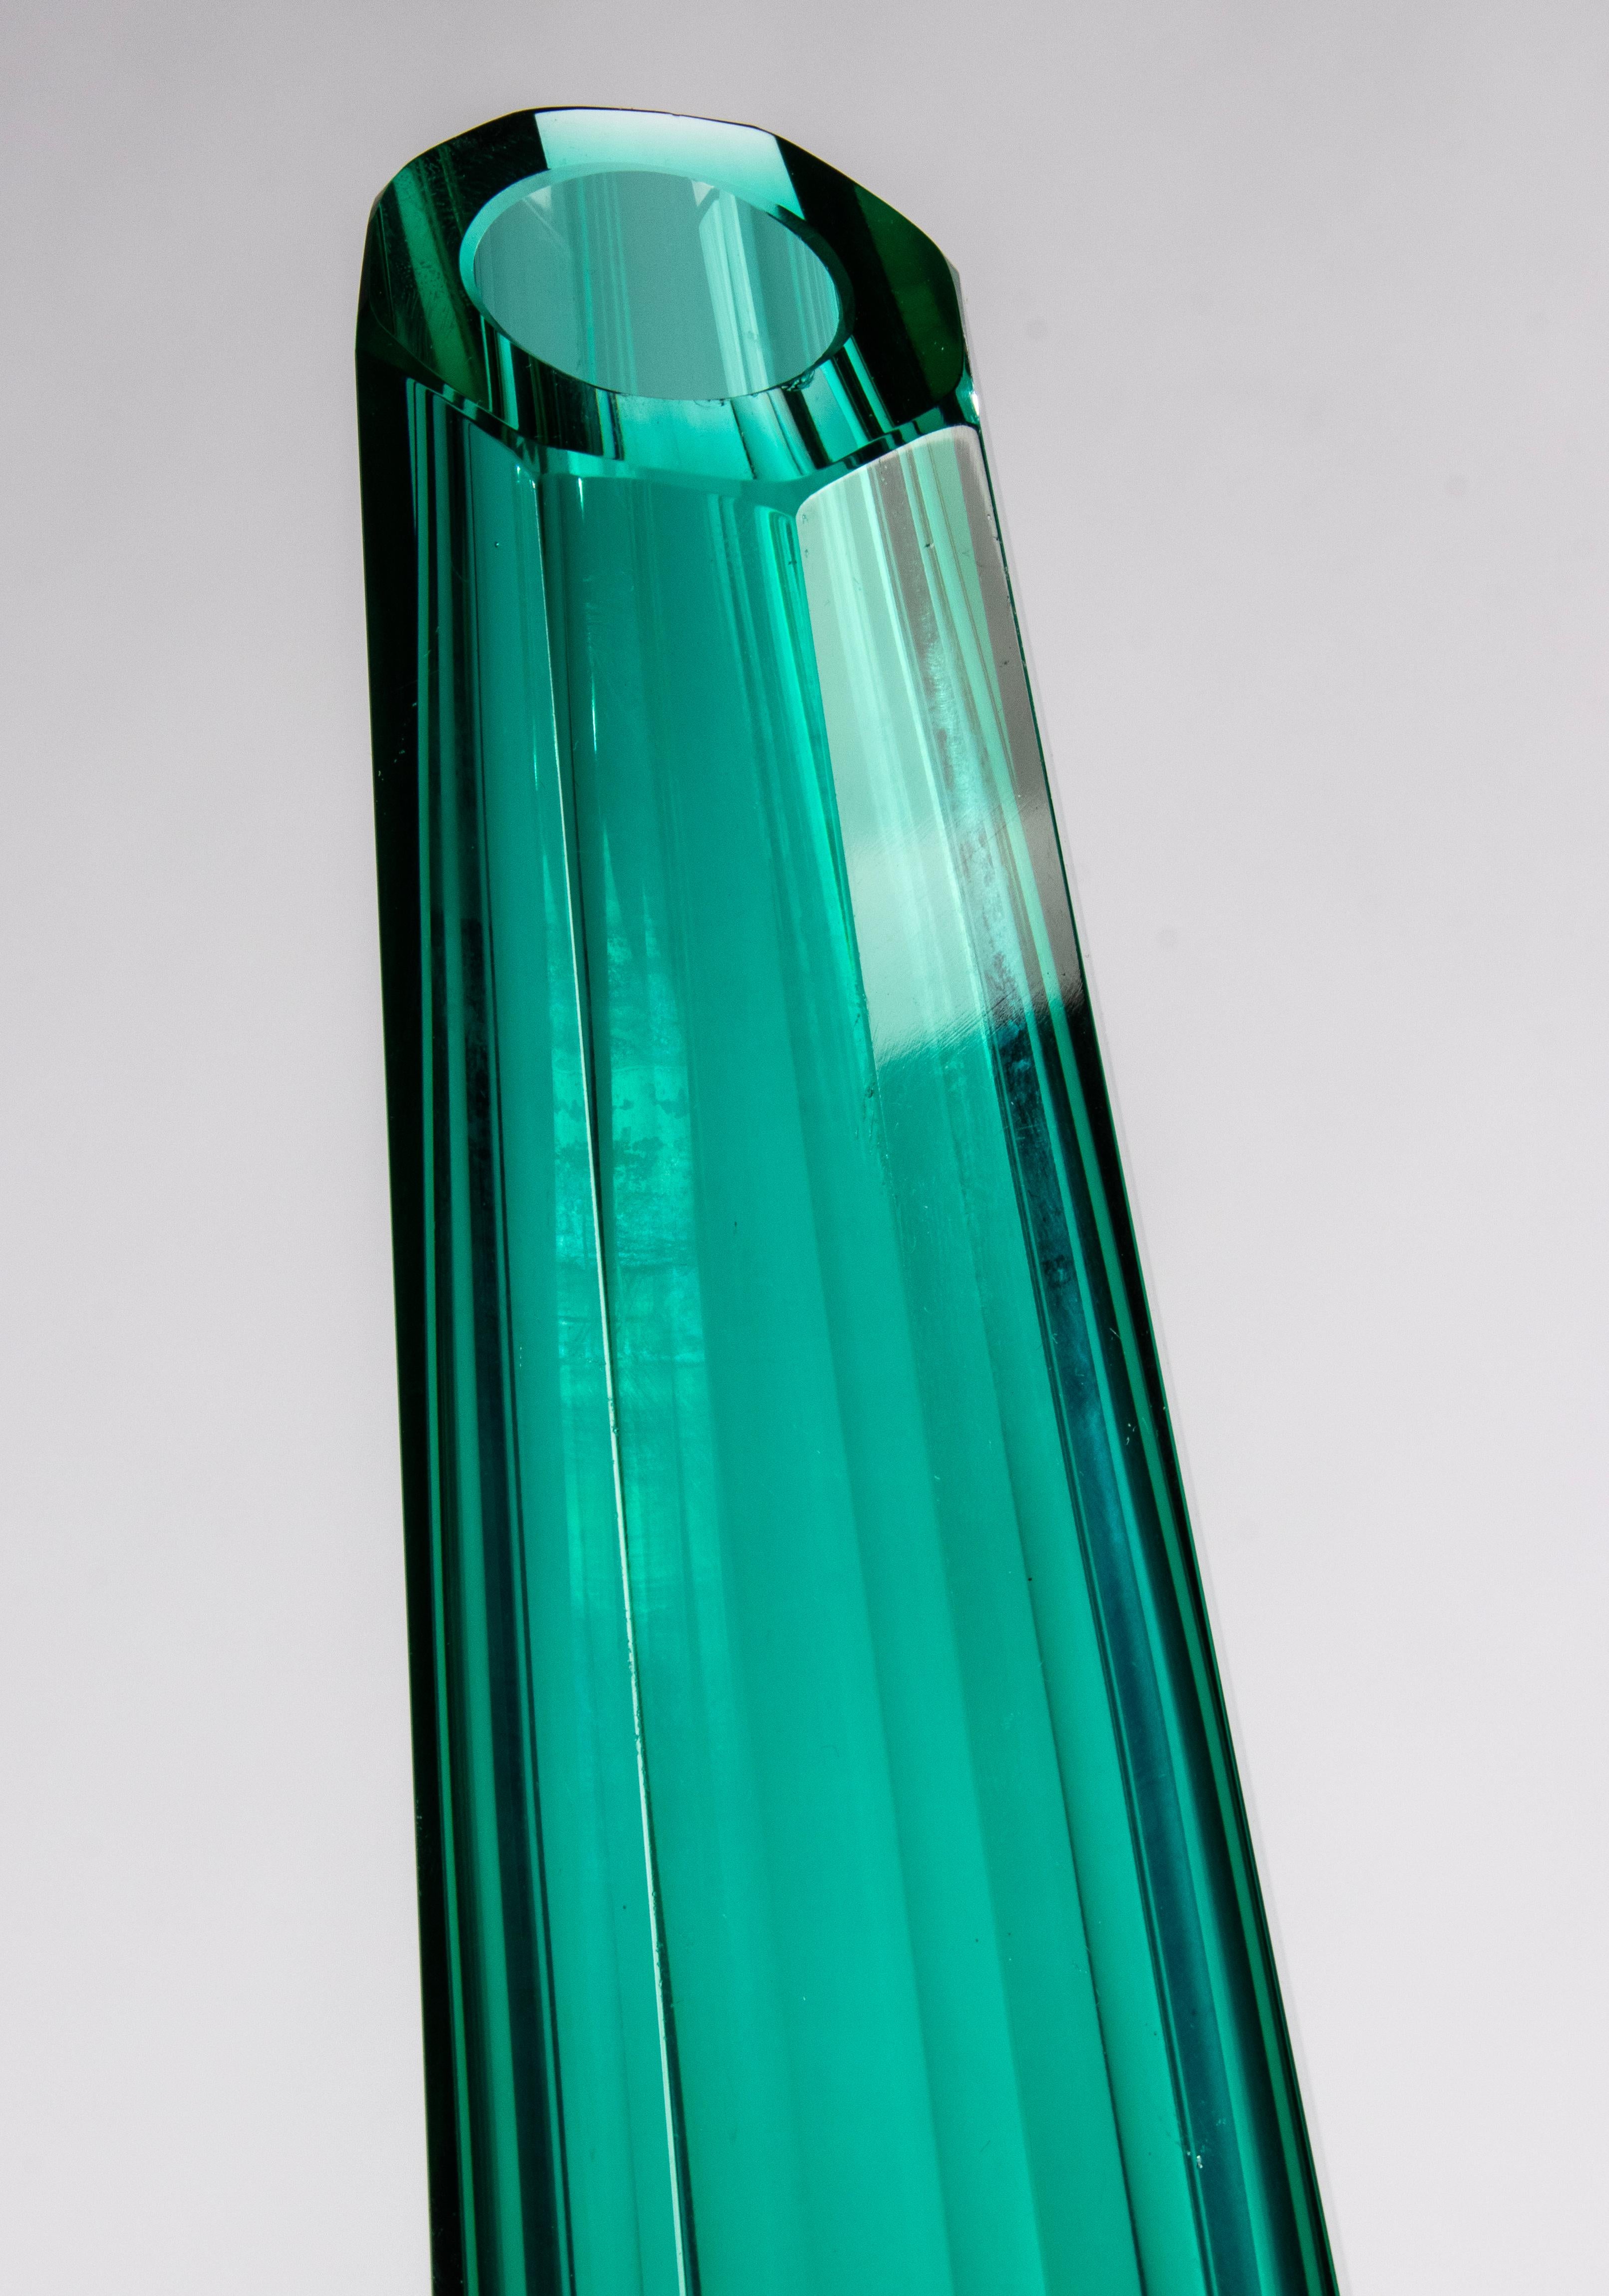 Czech 1930's Art Deco Crystal Vase - Attributed to Josef Hoffmann for Moser For Sale